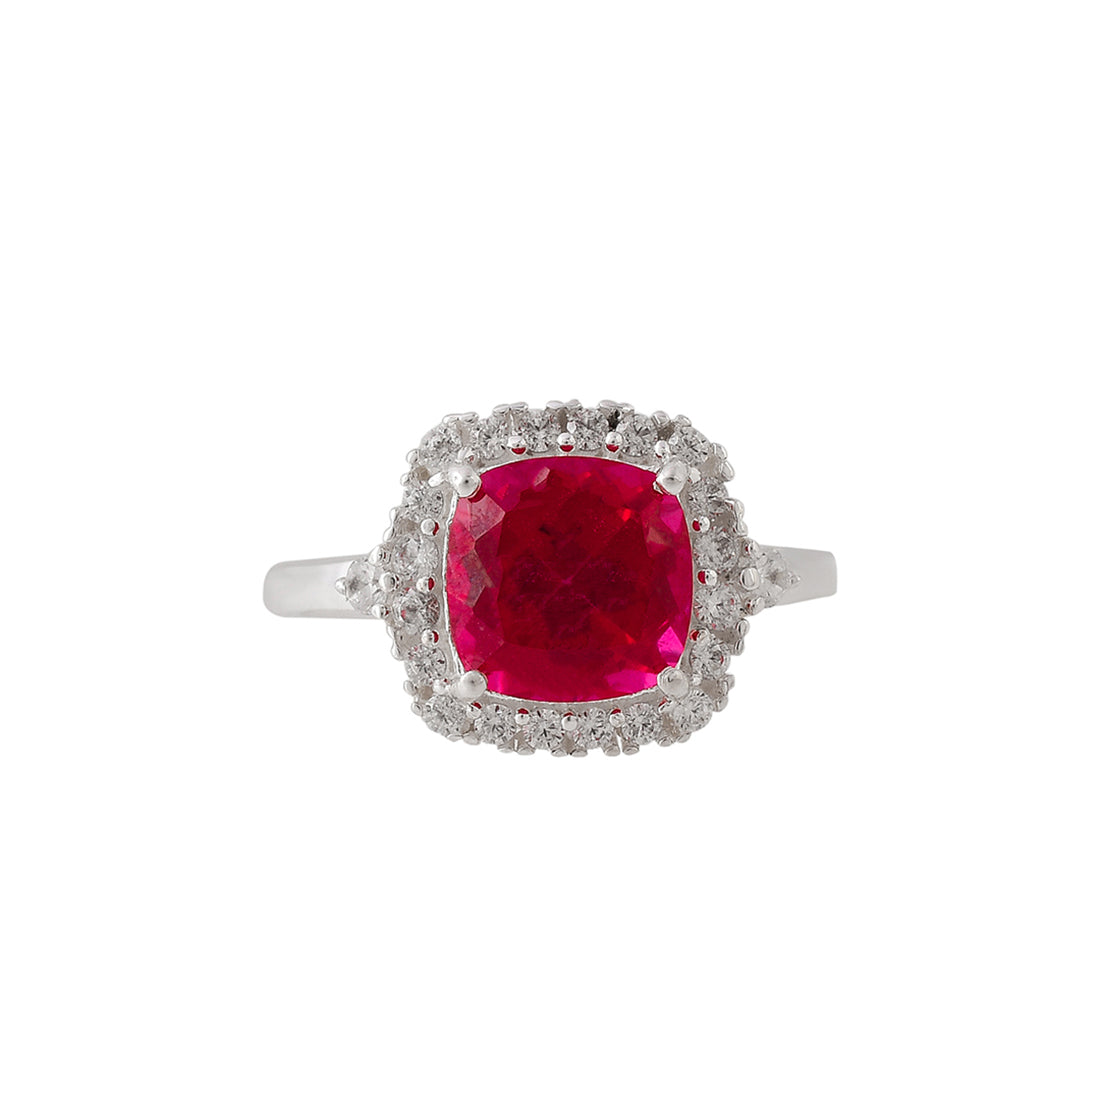 Women's 925 Sterling Silver Square Cut Red Ruby Embellished Ring - Voylla